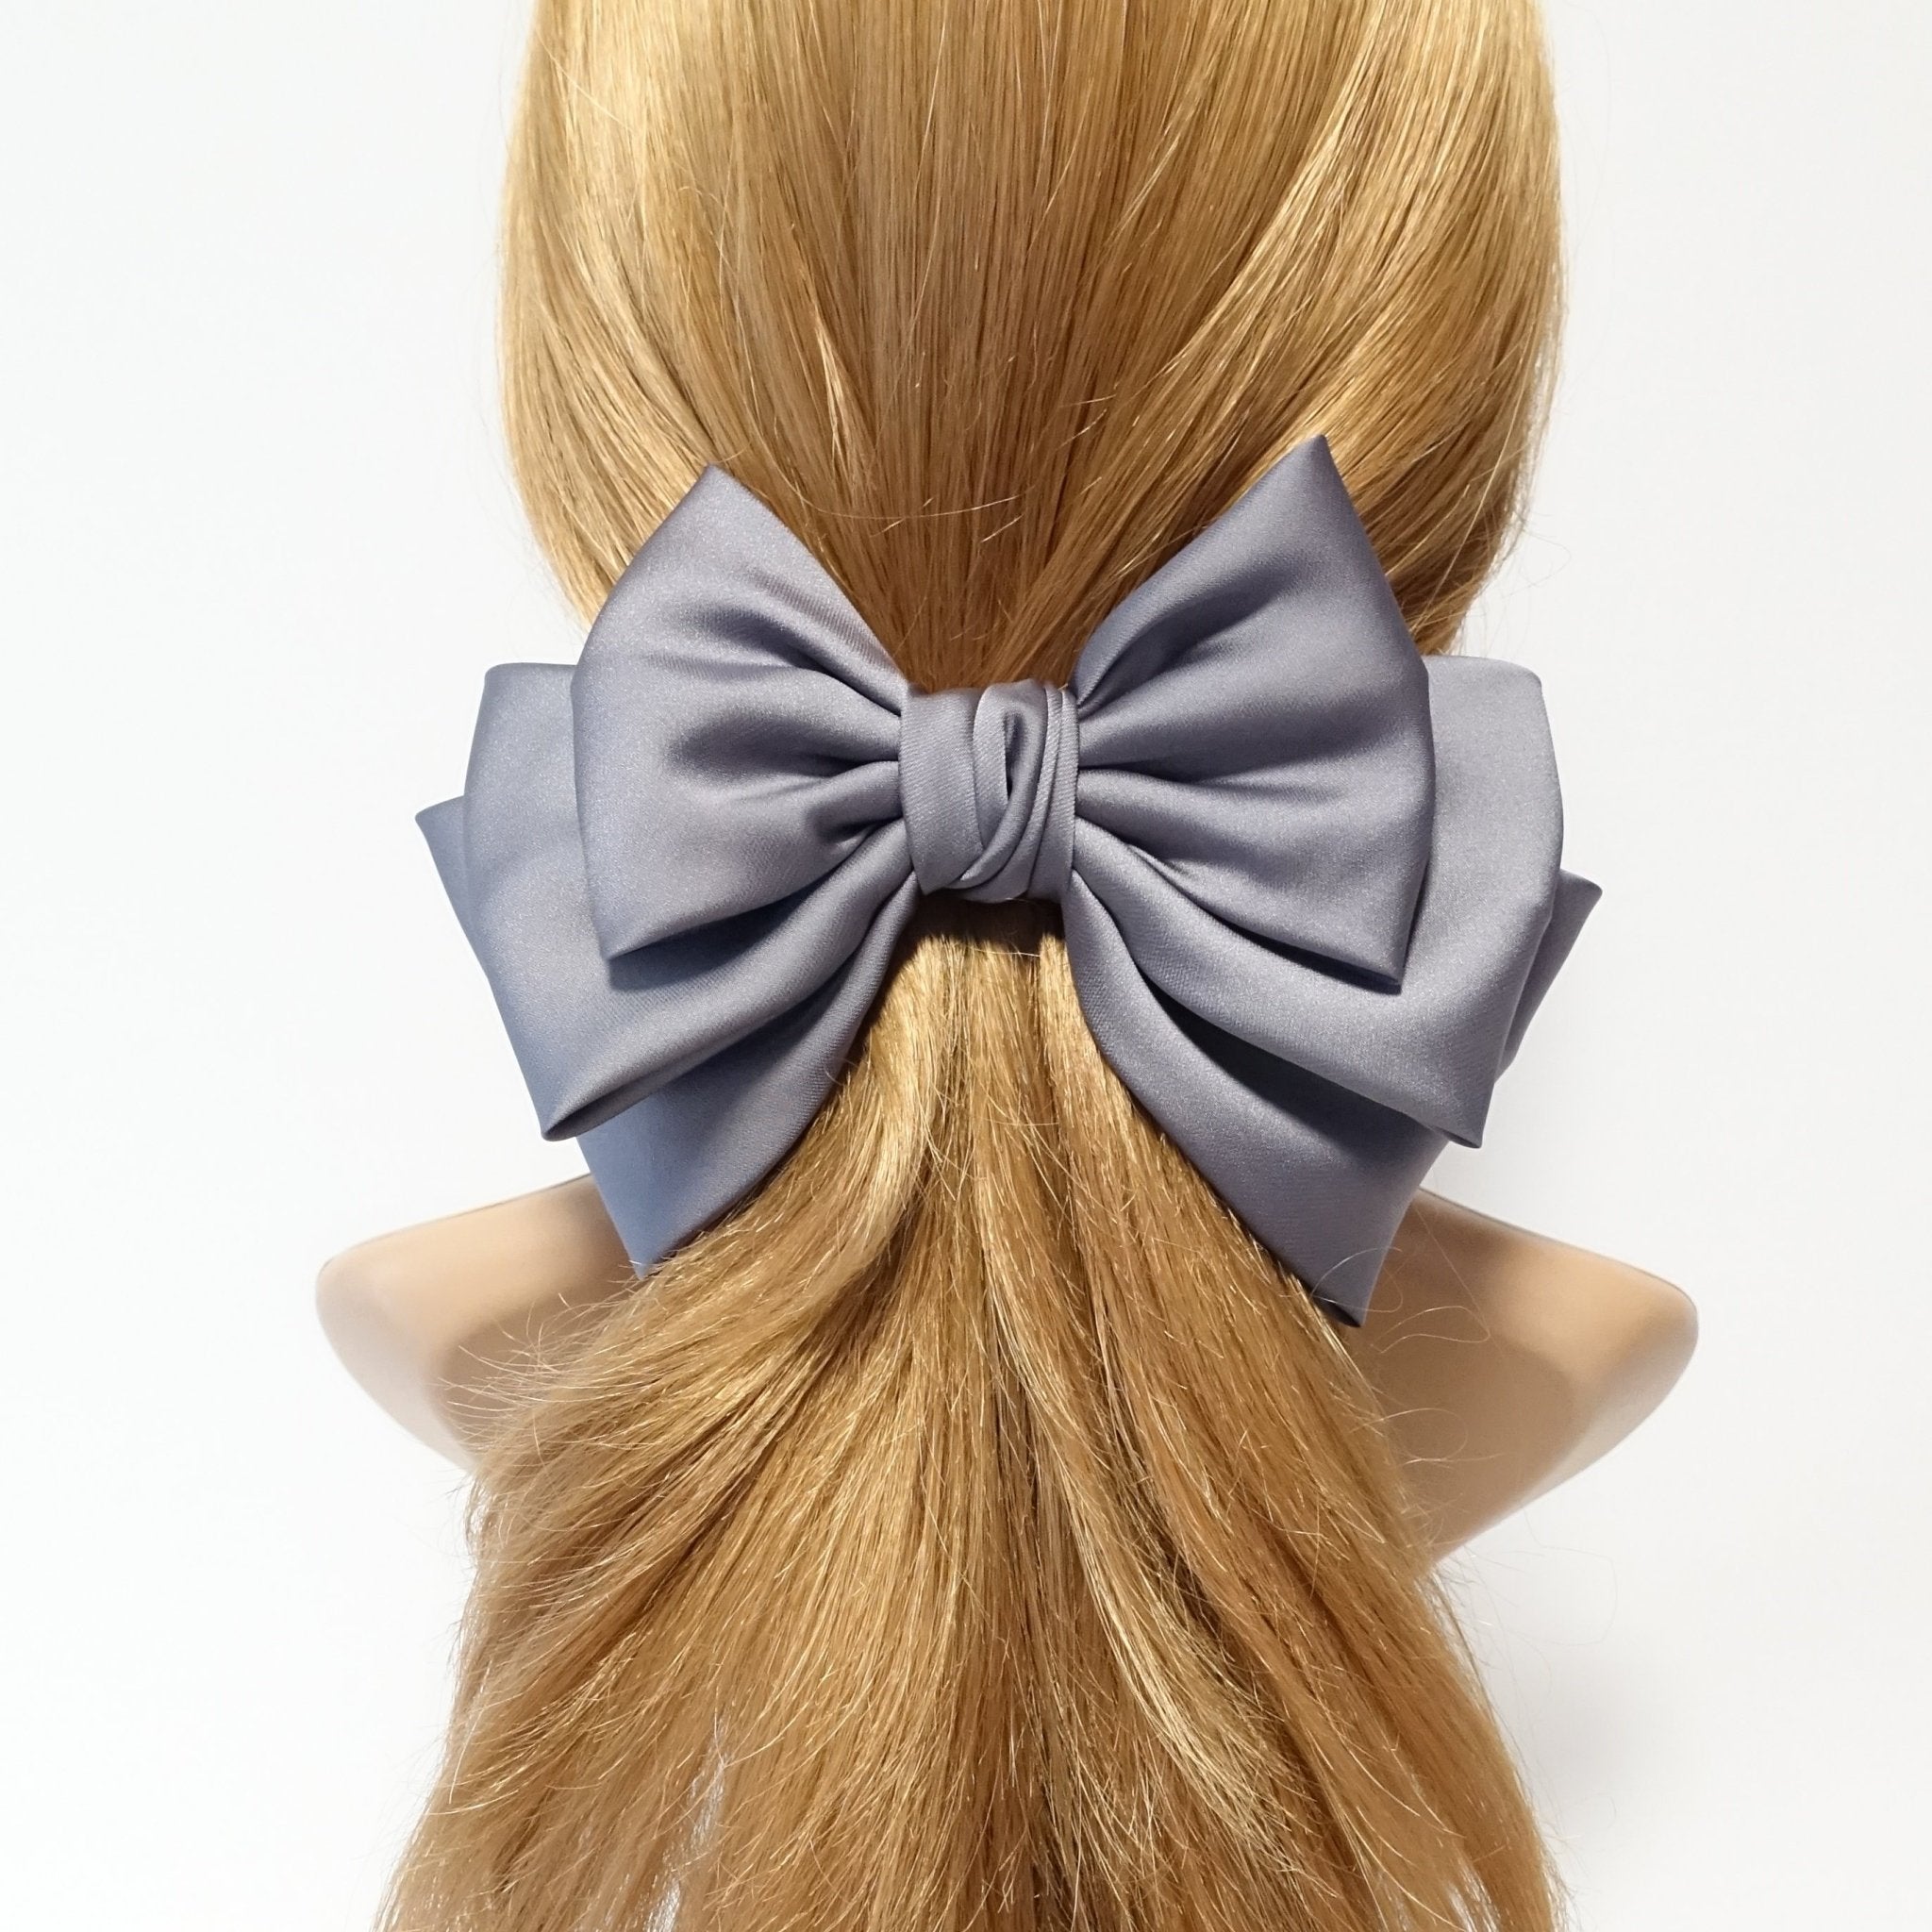 VeryShine claw/banana/barrette Gray big satin layered hair bow french barrette Women solid color stylish hair bow